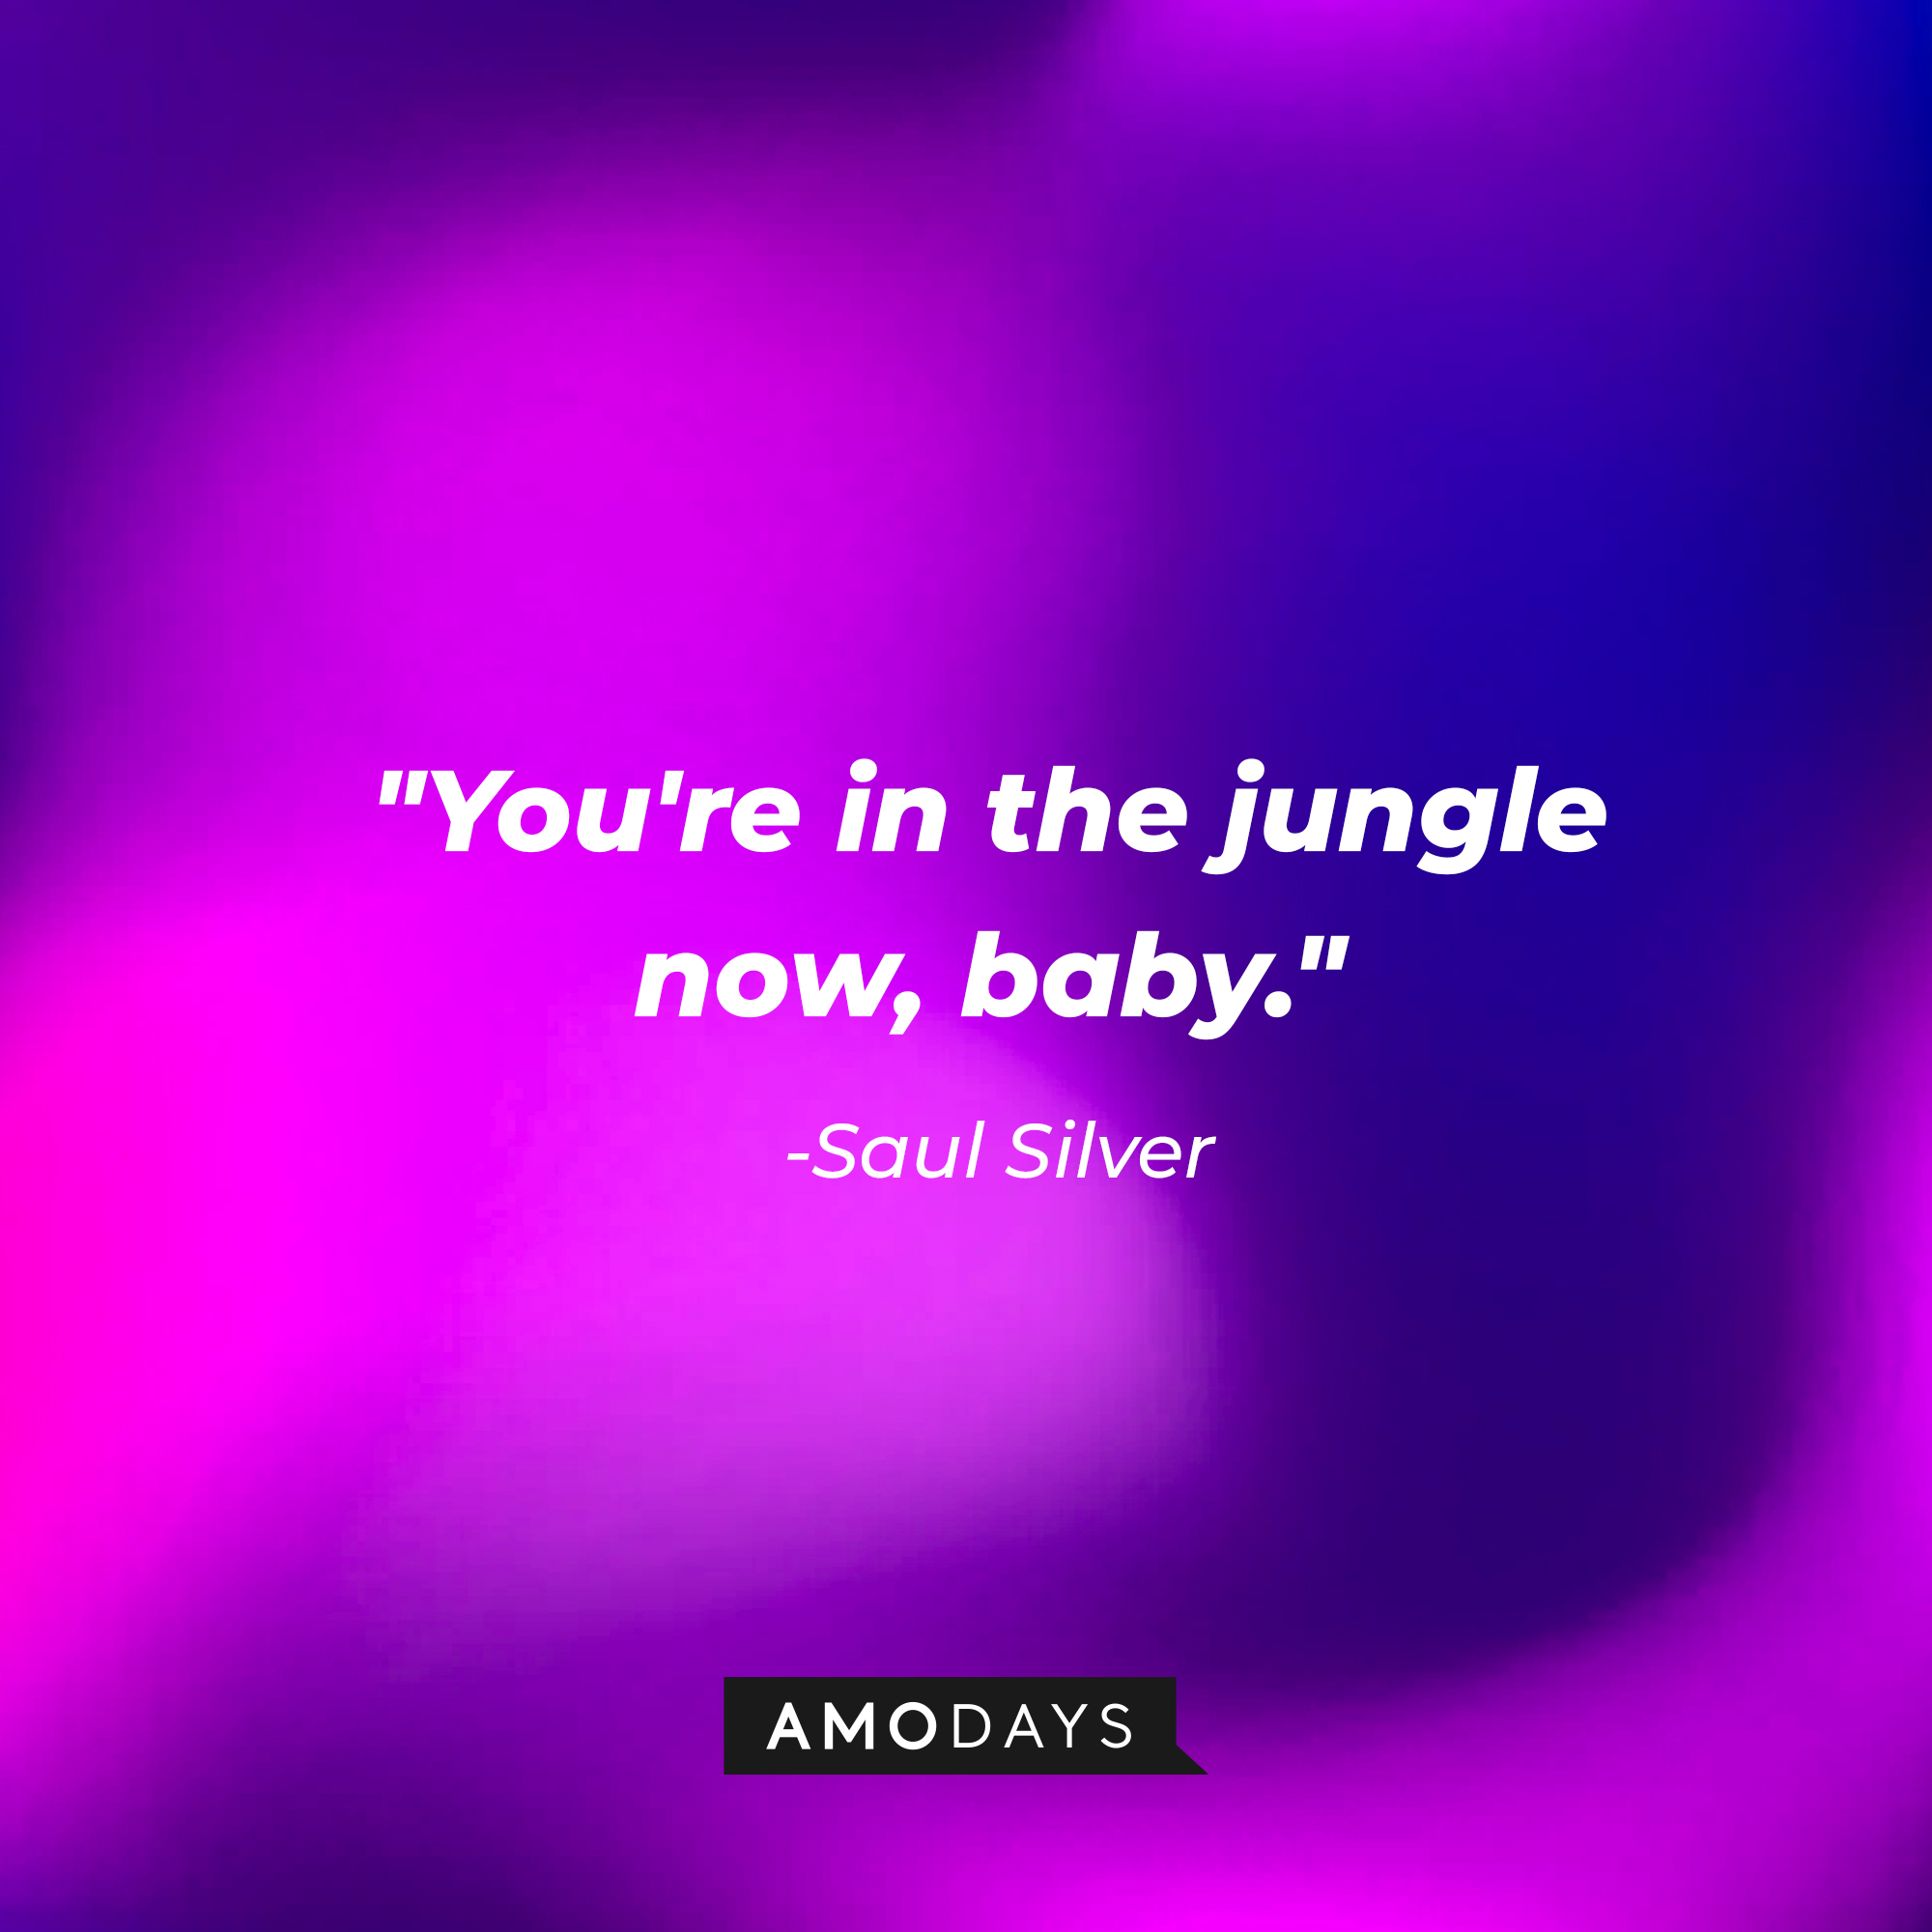 Saul Silver's quote: "You're in the jungle now, baby." | Source: AmoDays